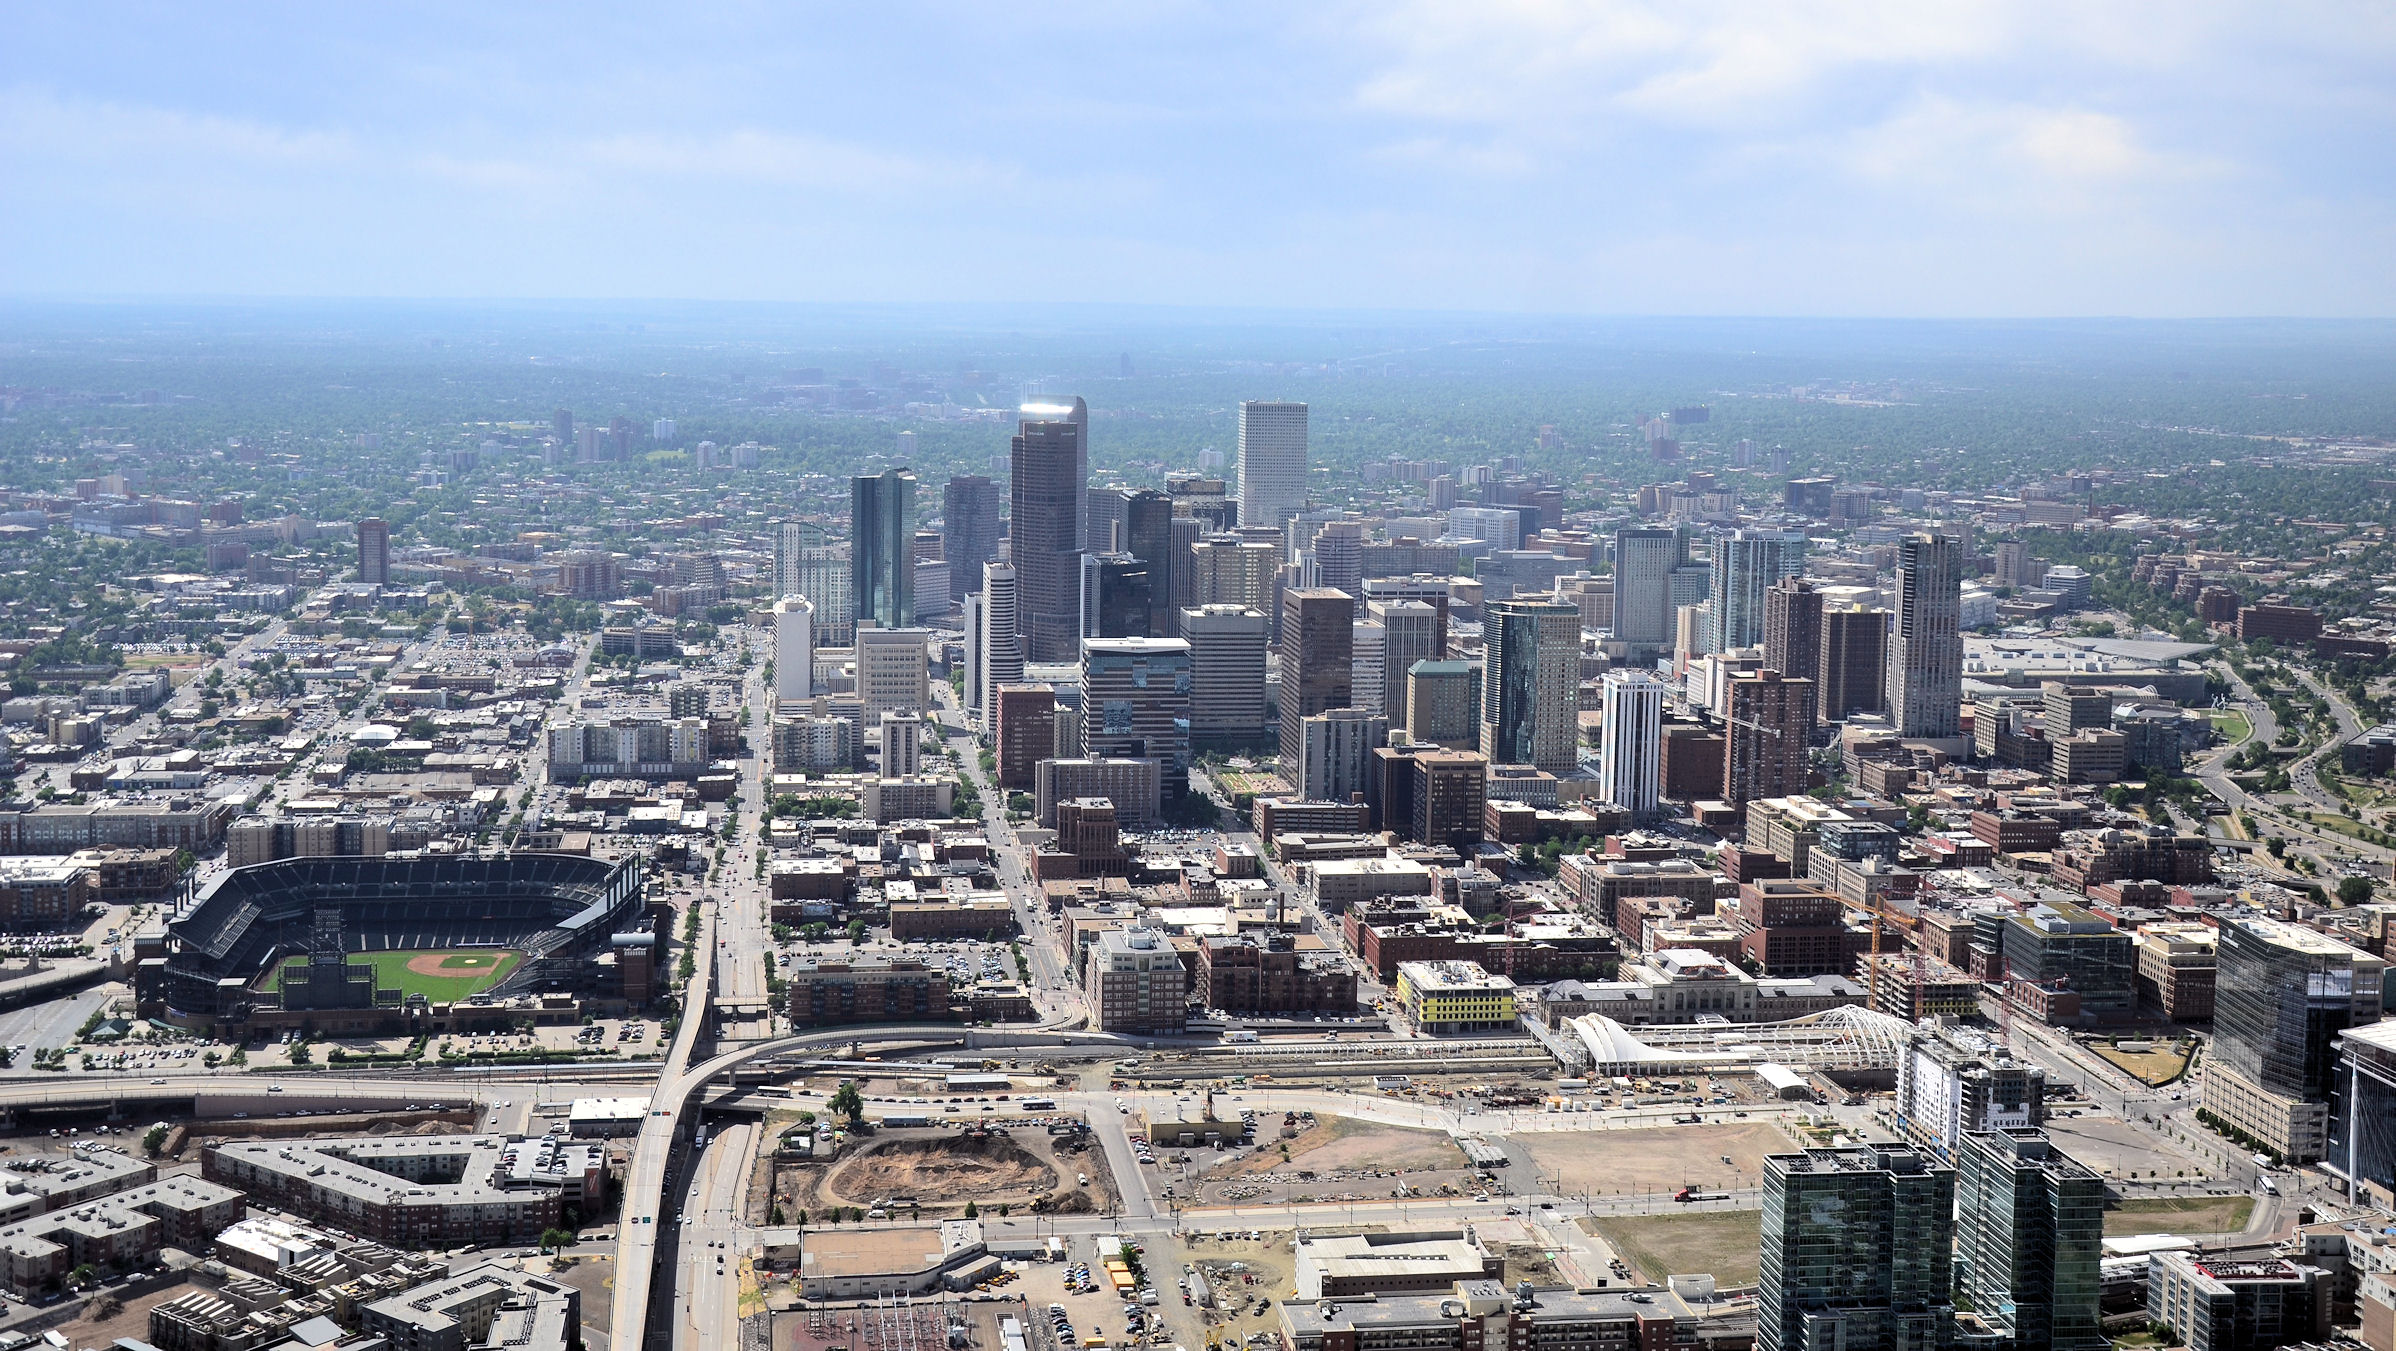 Denver Union Station and Downtown Denver in the background (May, 2013). 